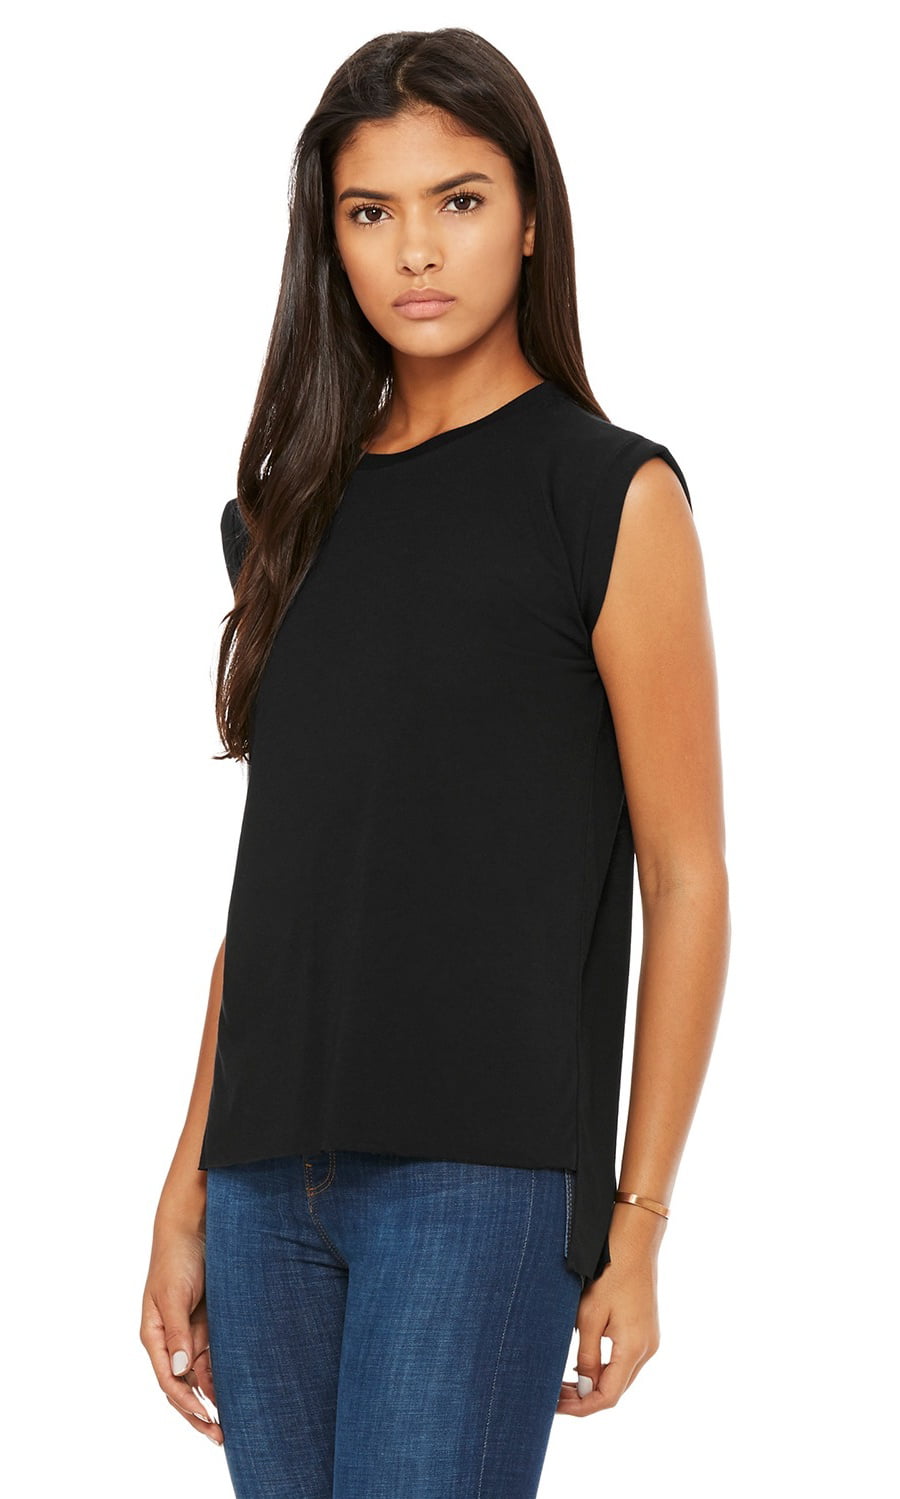 BELLA+CANVAS - Women's Flowy Muscle Tee with Rolled Cuffs - 8804 ...